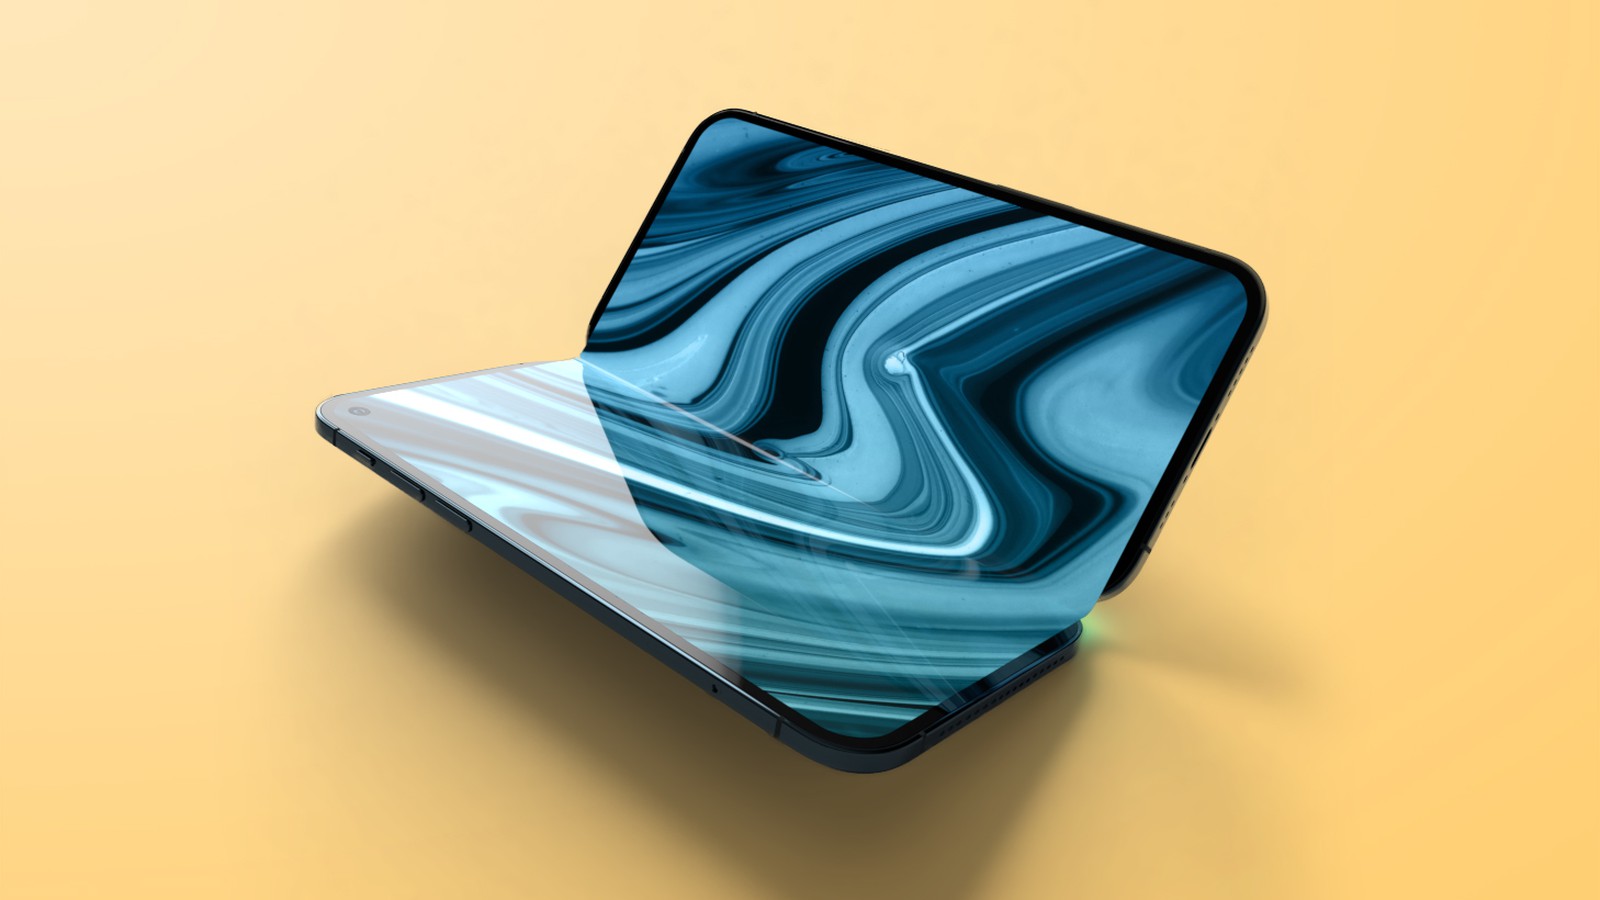 Rumored foldable iPhone